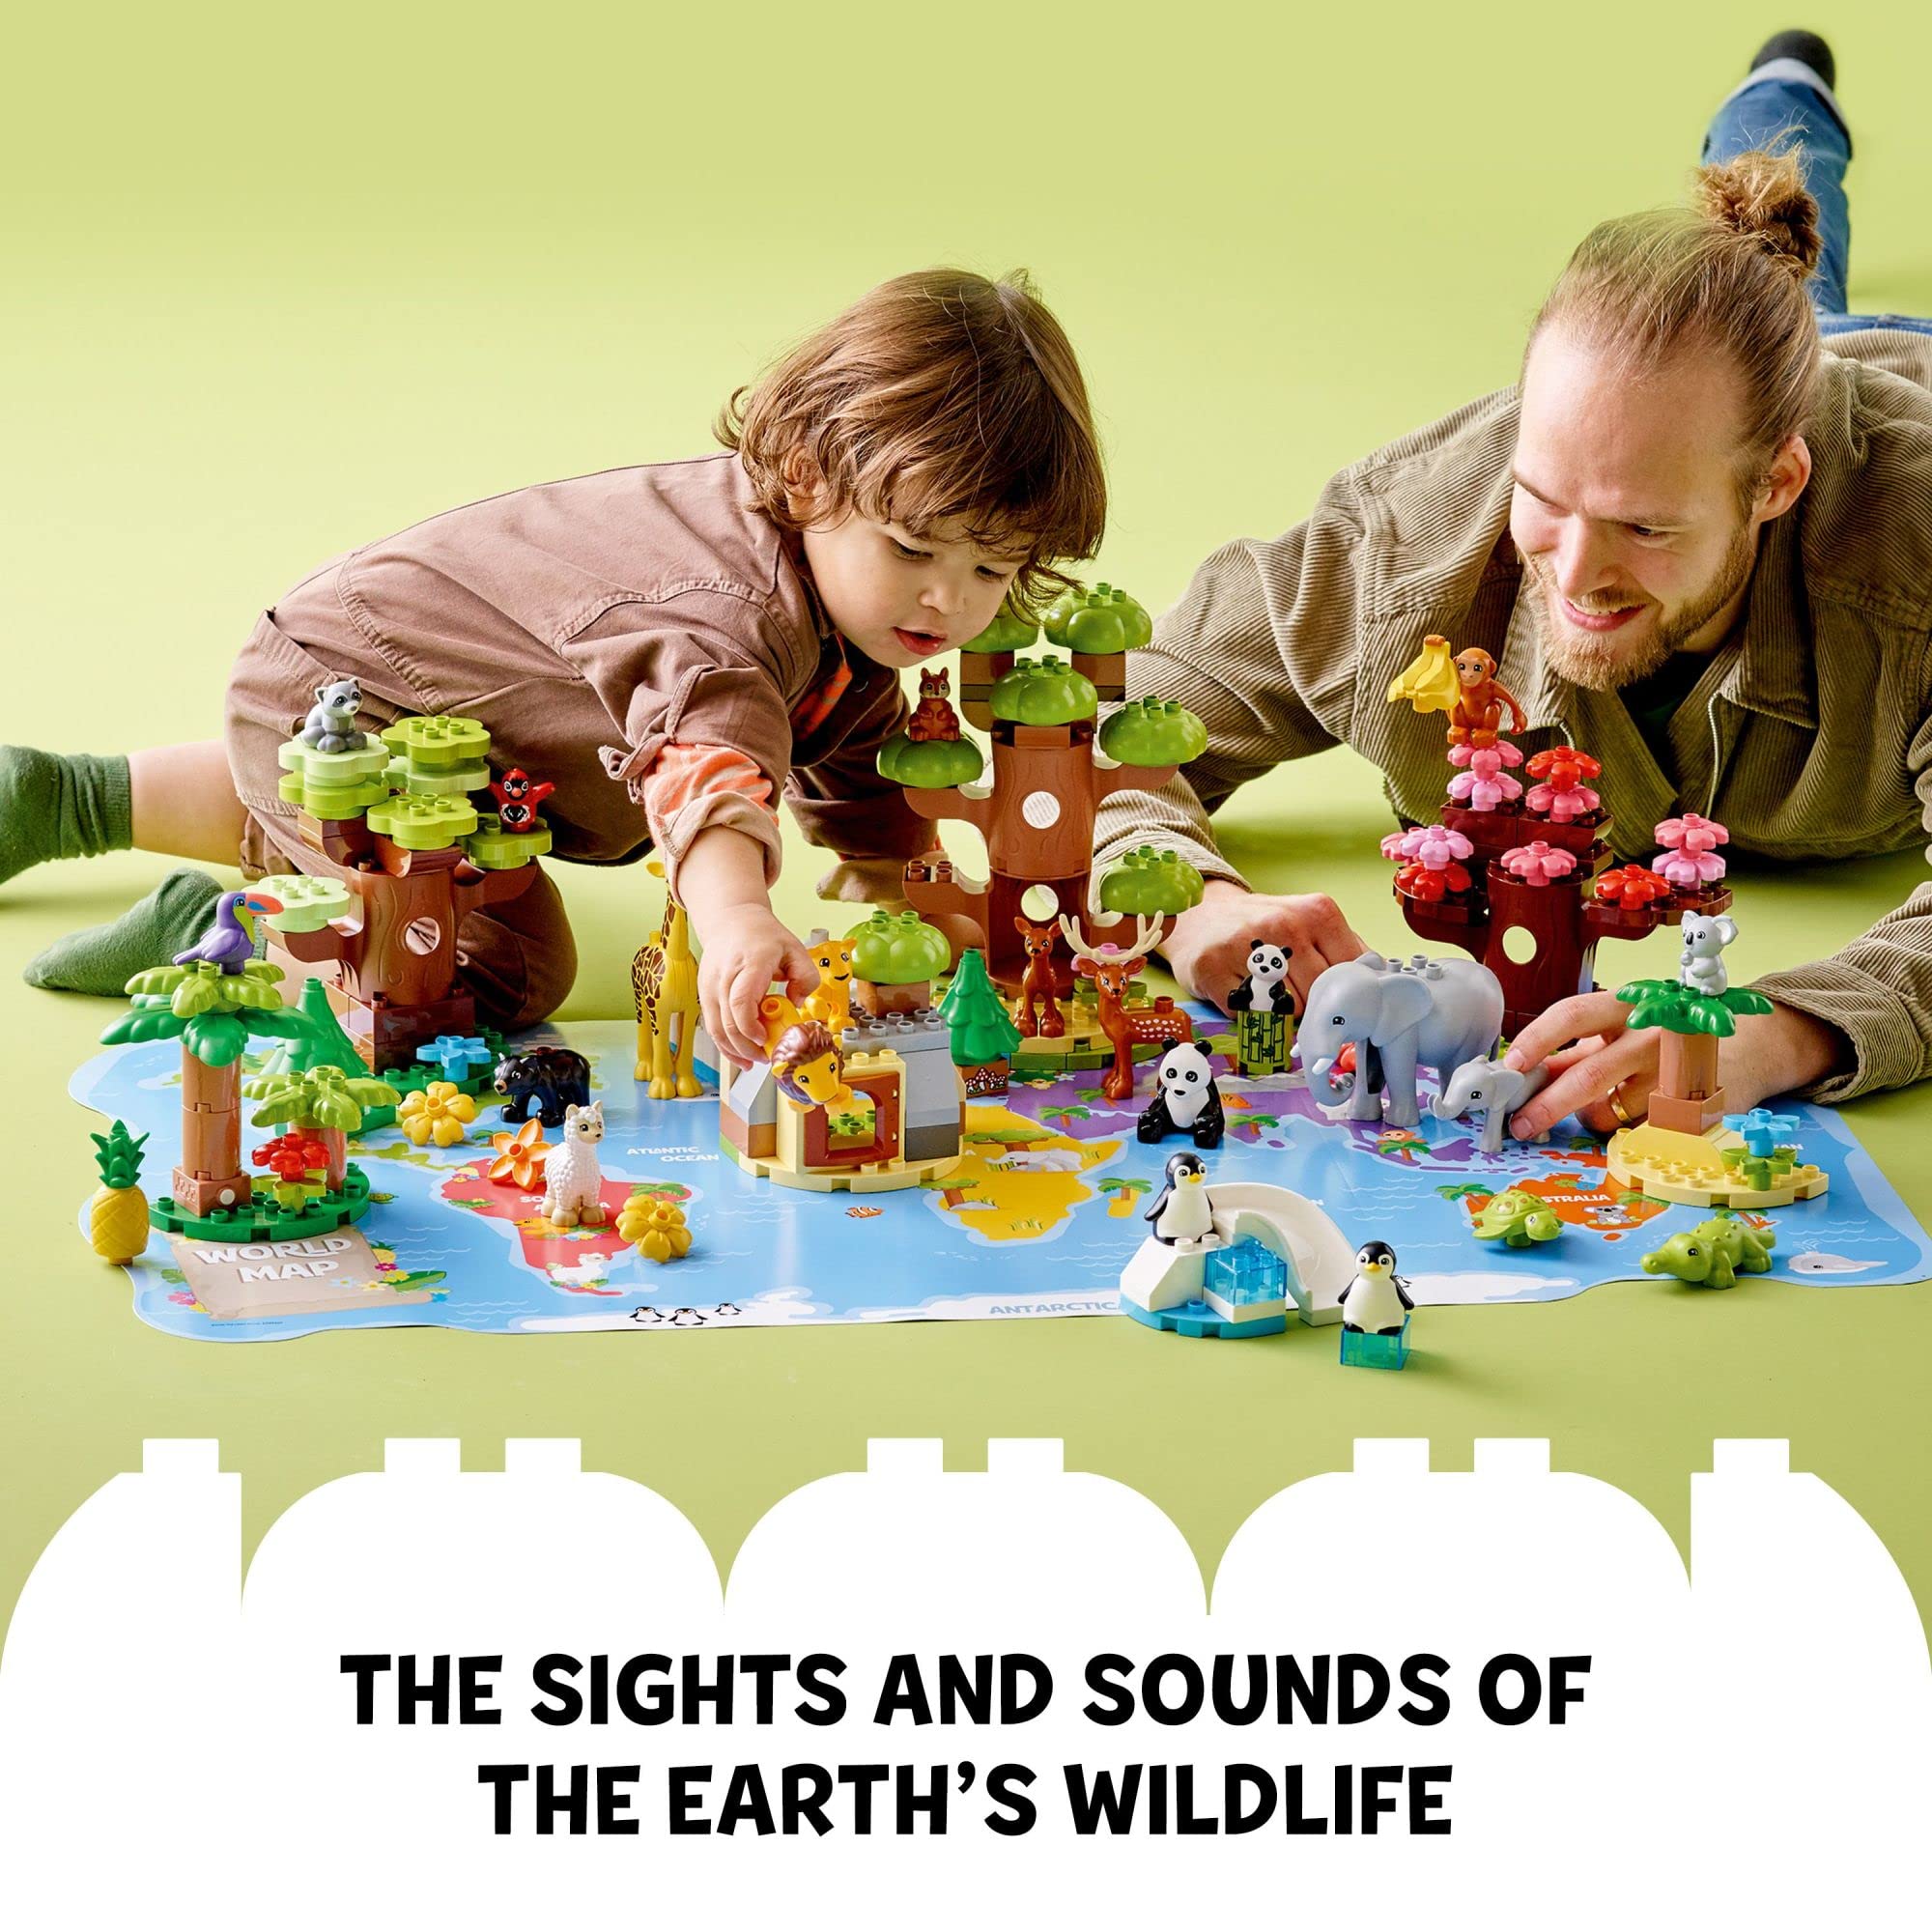 LEGO DUPLO Wild Animals of The World Toy 10975, with 22 Animal Figures, Sounds and World Map Playmat, Educational Animal Building Kit, Learning Toy, Gift for Toddlers, Girls, Boys 2-5 Year Old